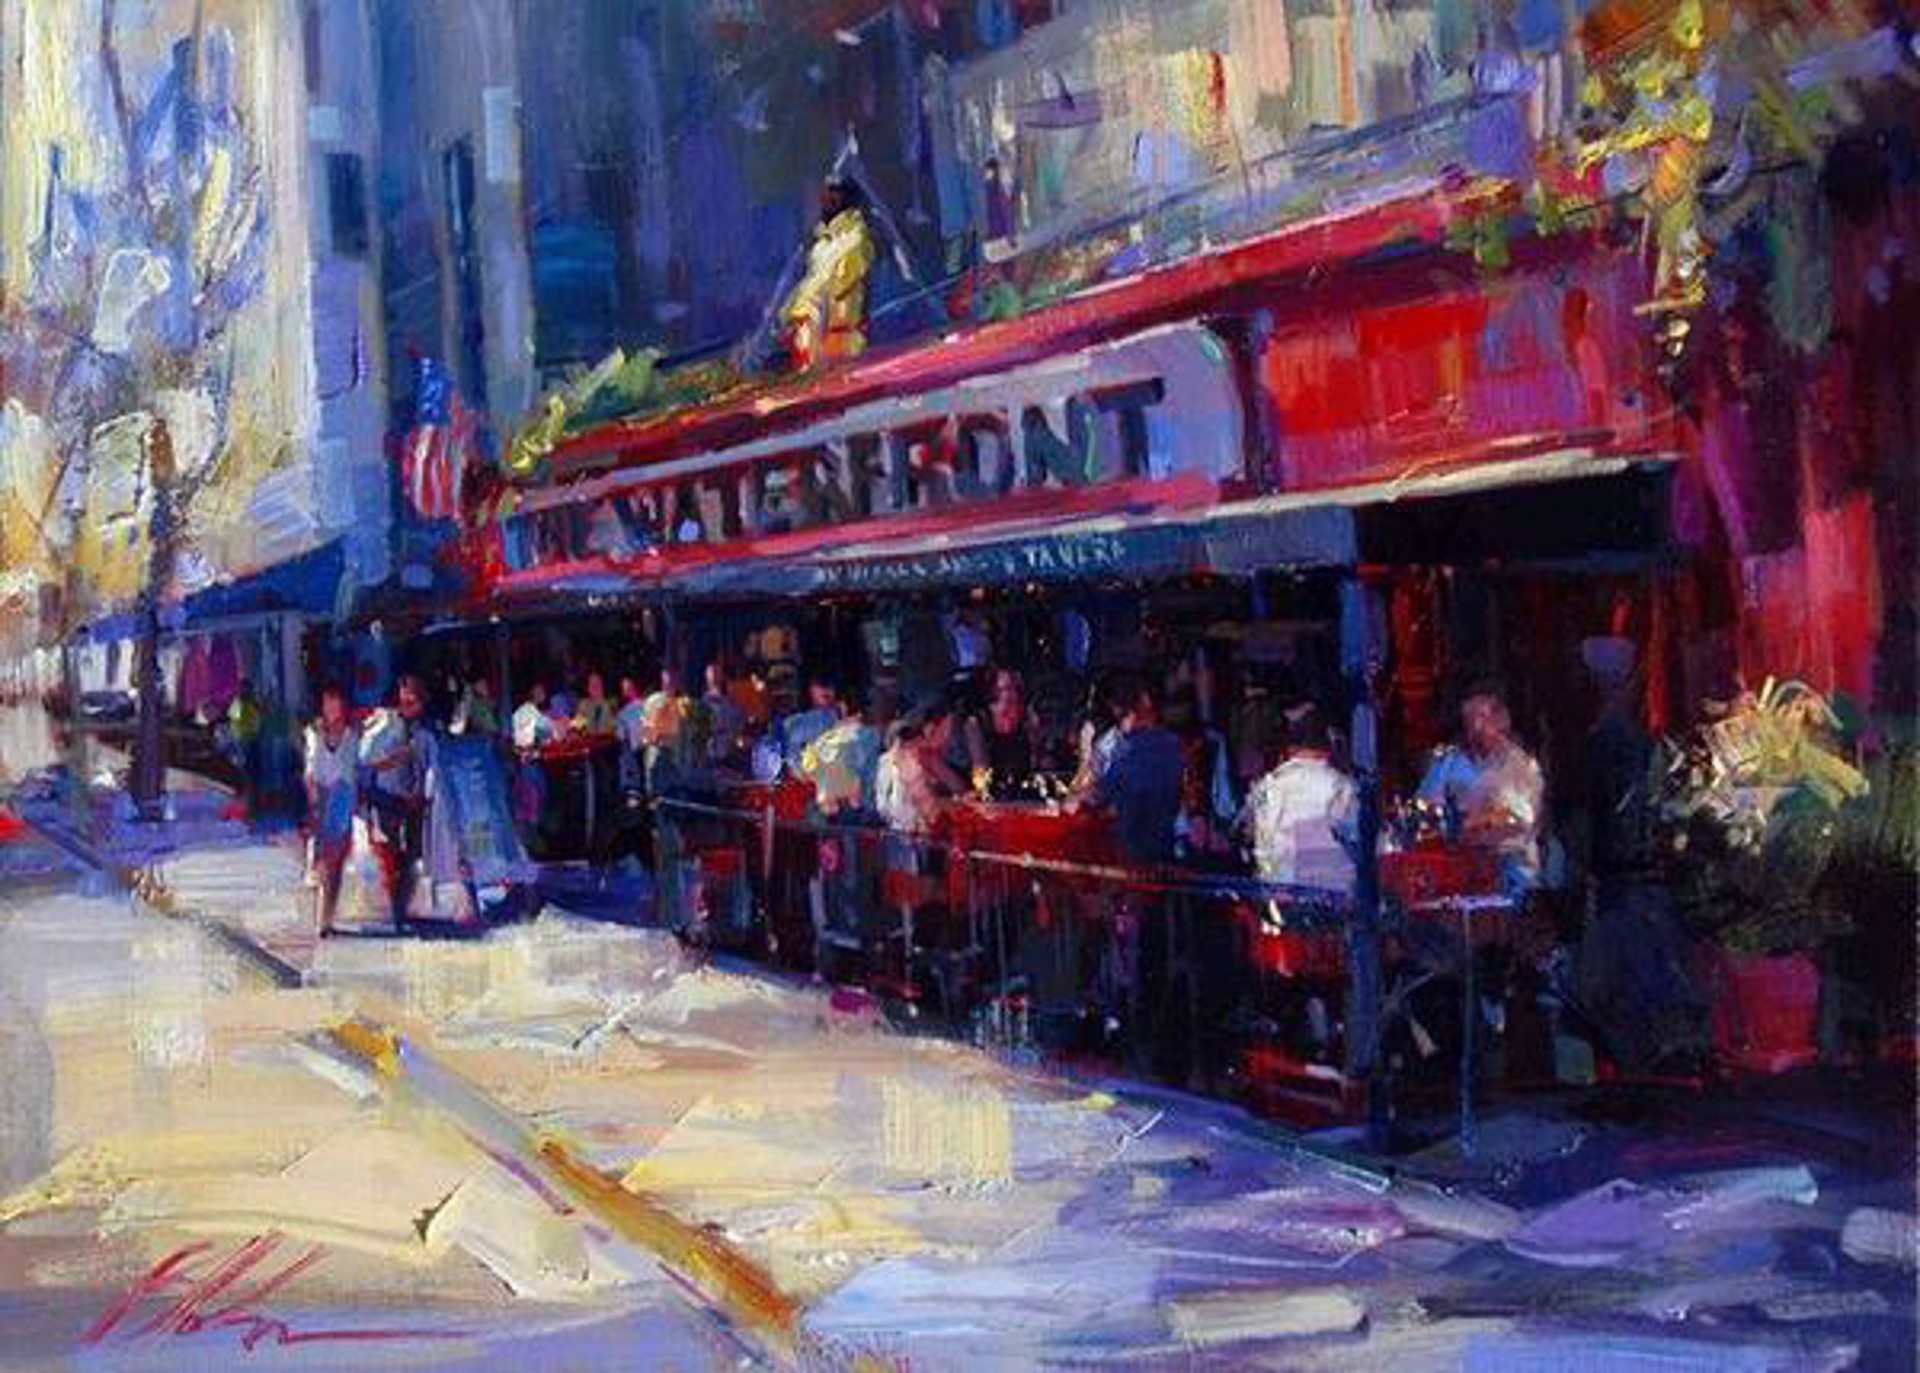 Waterfront by Michael Flohr